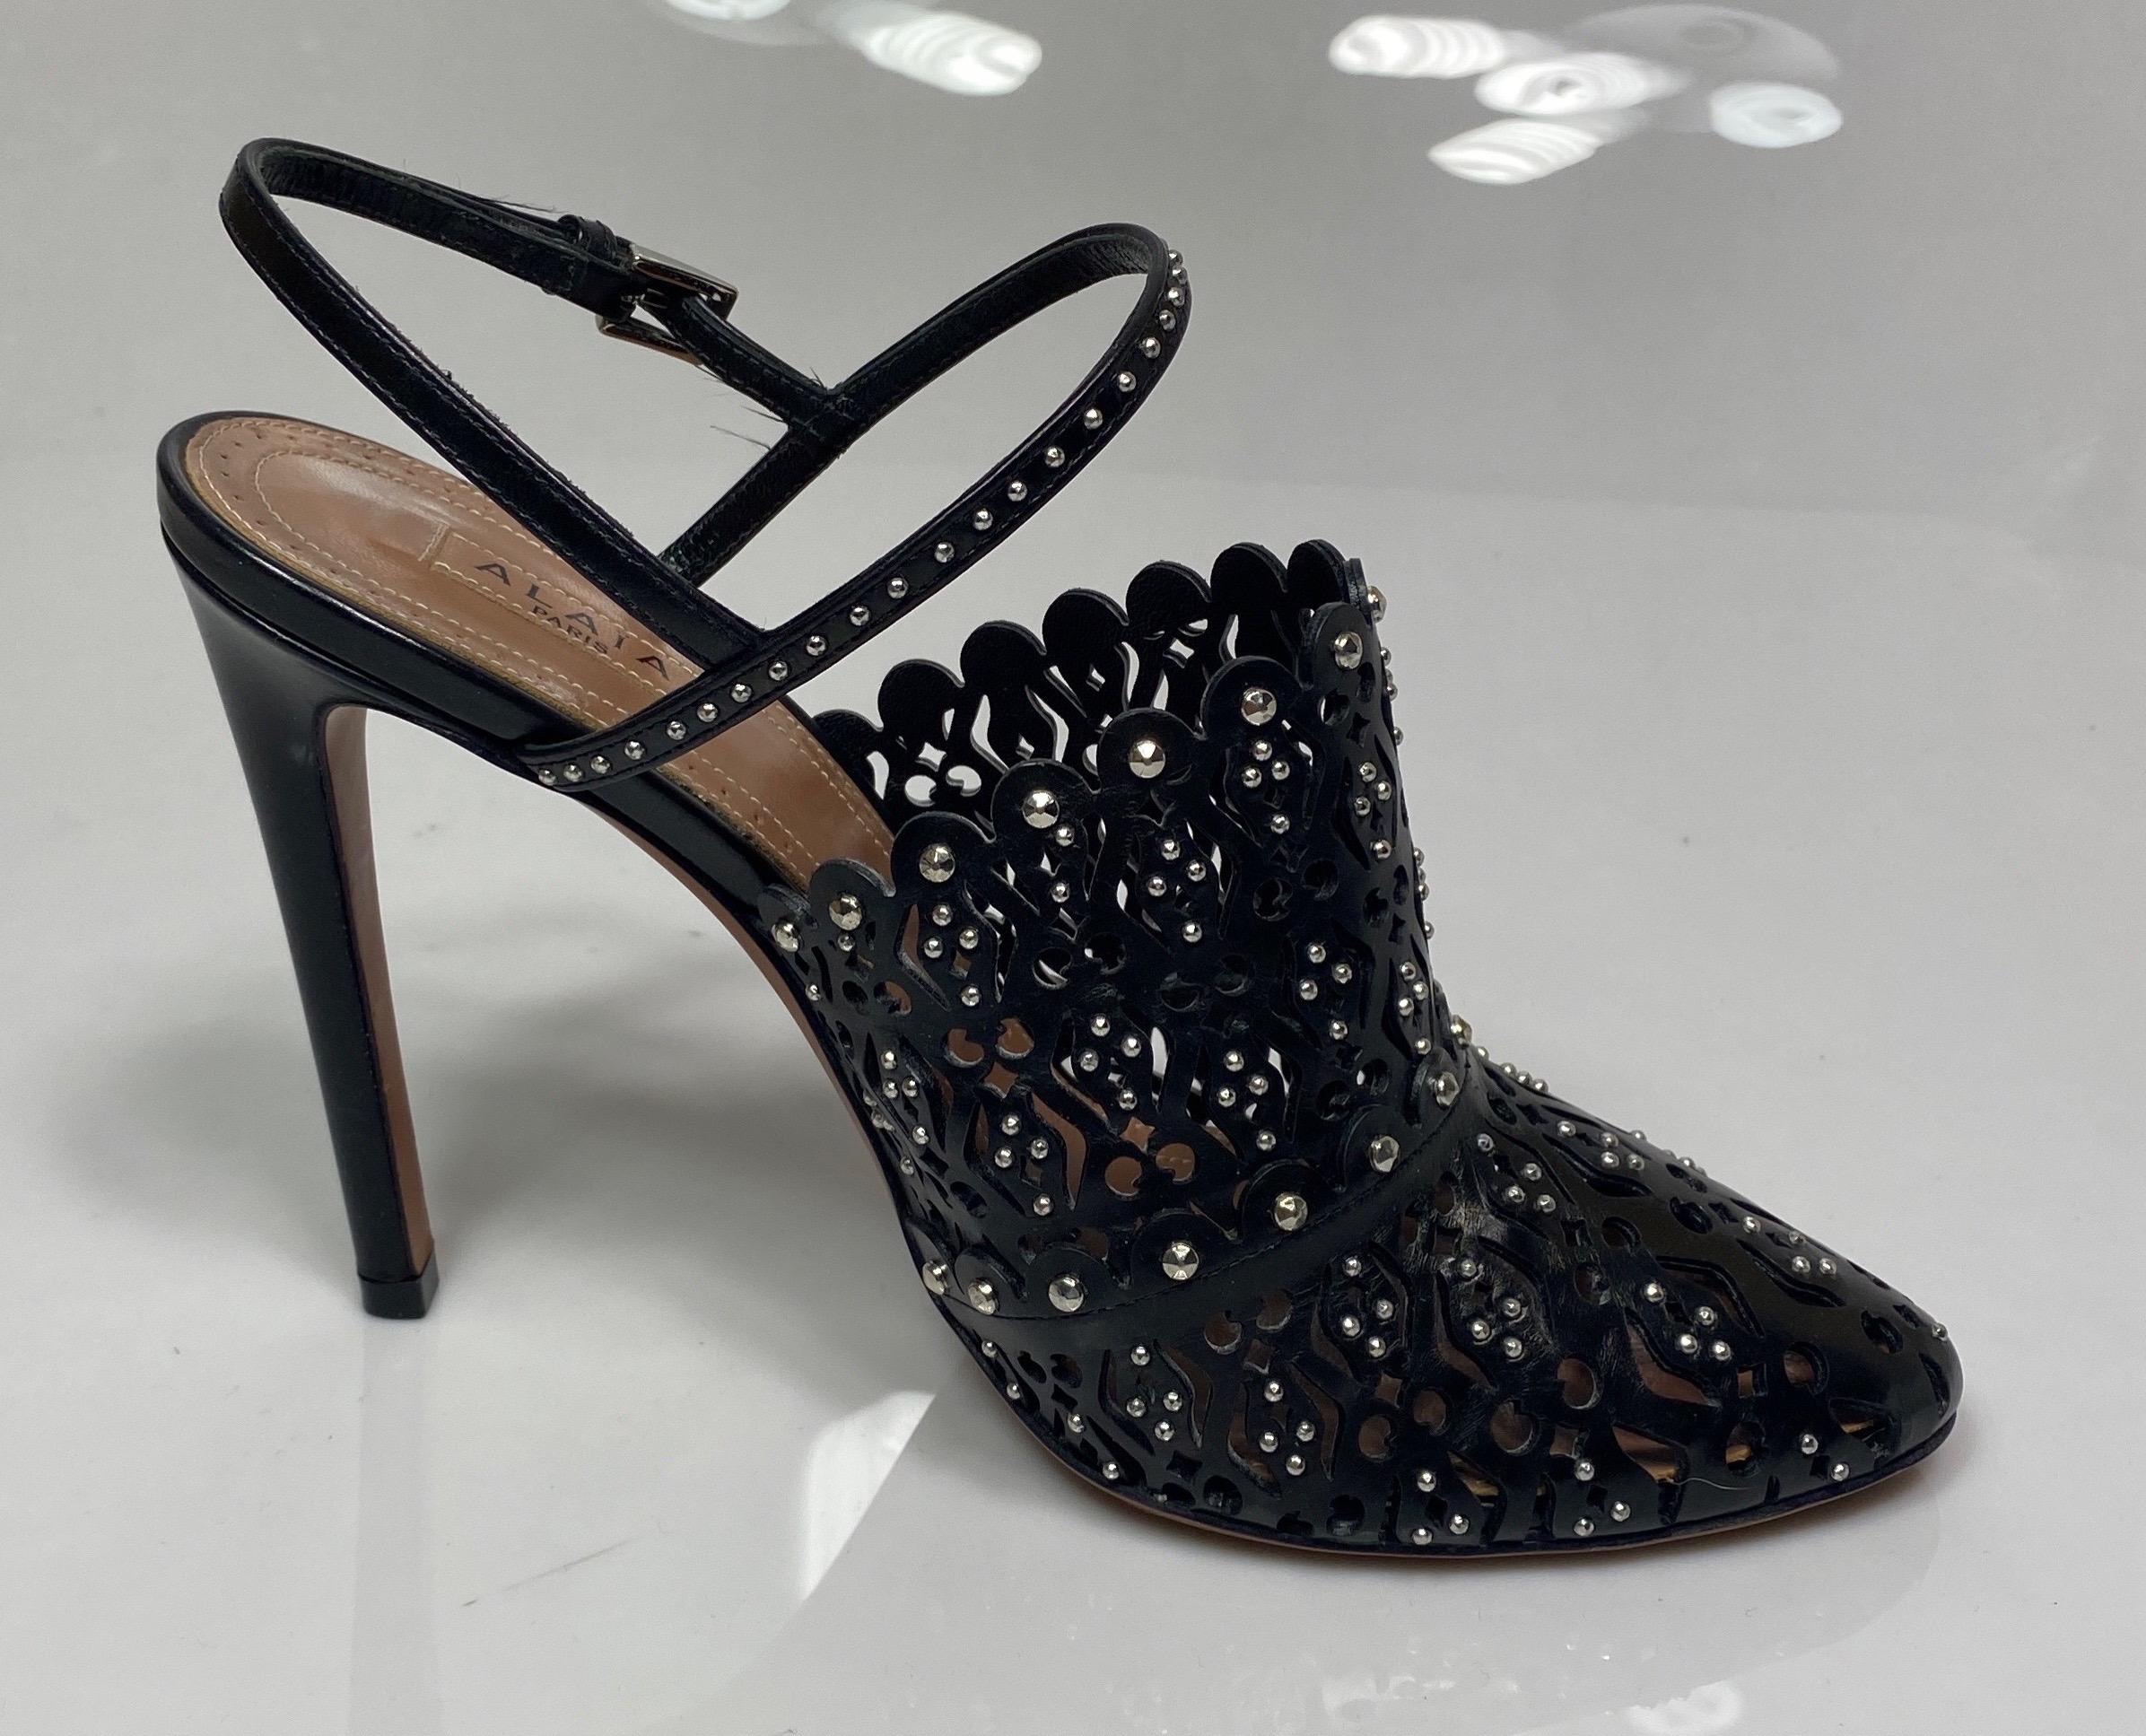 Alaia Black “Bottines” slingback heels - Size 37.5. The description is:
4.5” heel height
Double strap with adjustable buckle
Perforated leather looking like lace
Multi size silver metal studs throughout
Comes with shoe box
Excellent condition